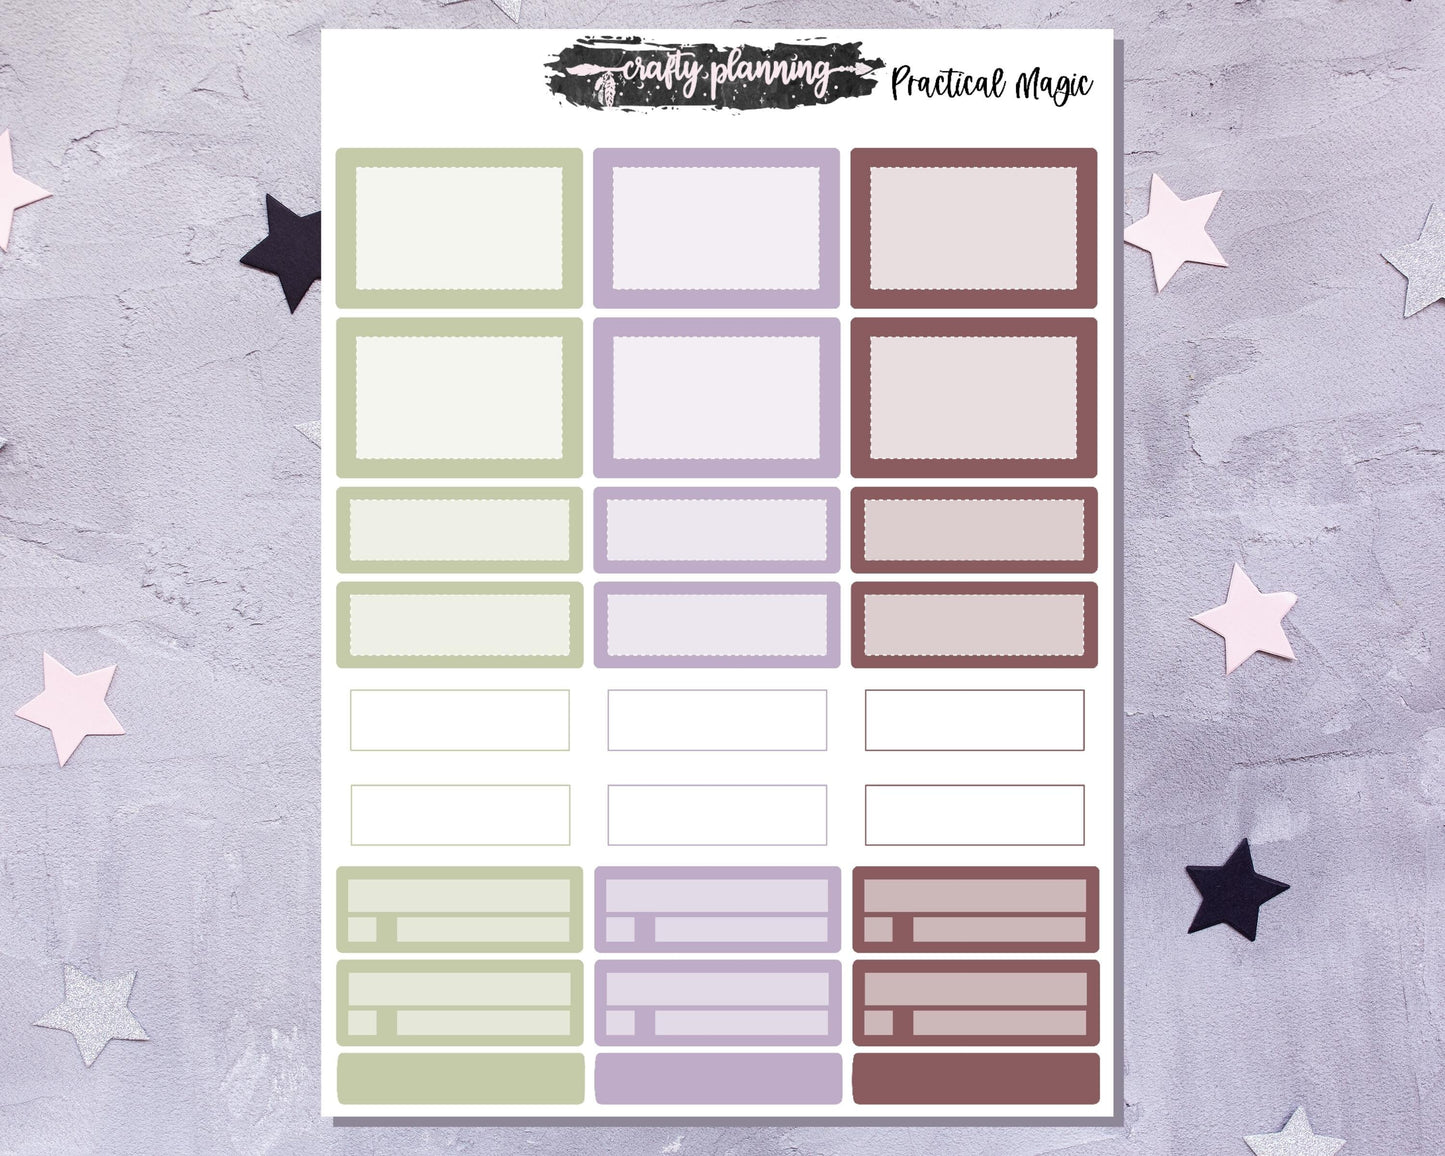 Witchcraft Stickers, Movie Stickers, Weekly Planner Kit, Vertical Planner Kit, Planner Stickers, Esoteric Stickers, Witchy Stickers